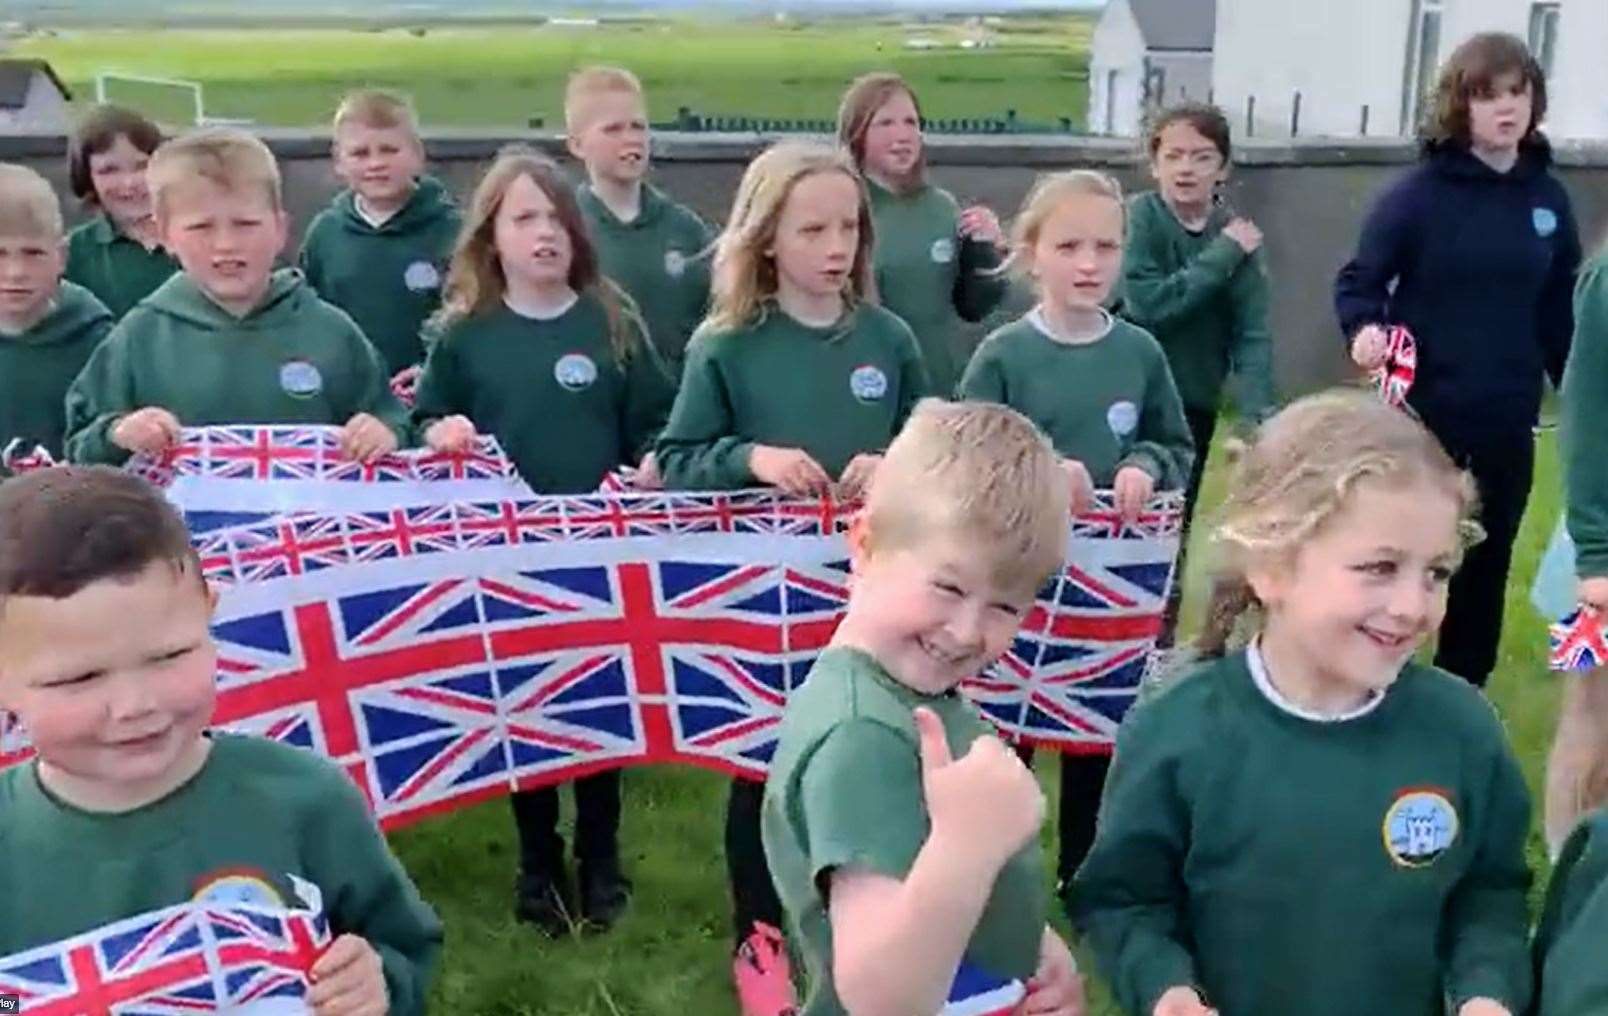 Thumbs-up for Her Majesty in this screenshot from the Keiss Primary School video of Sweet Caroline.